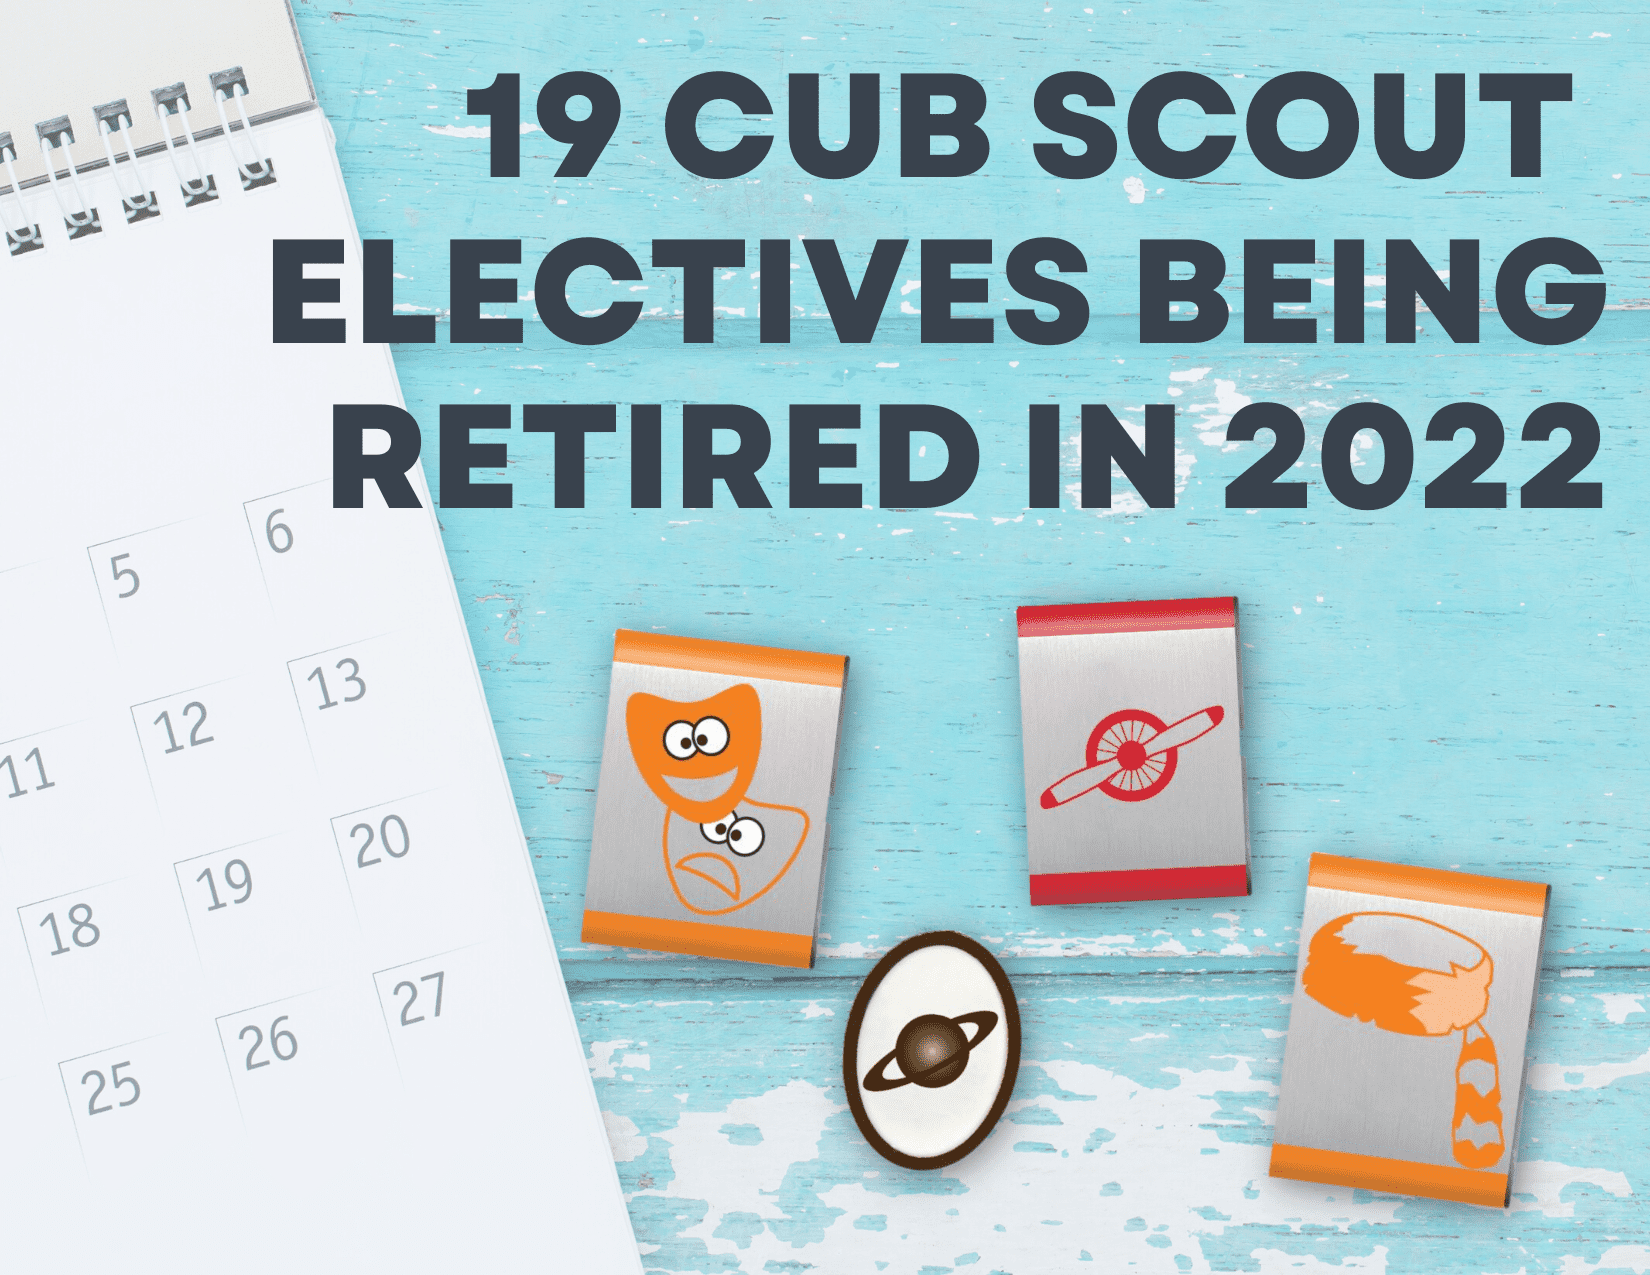 The 19 Cub Scout Elective Adventures Being Retired in 2022